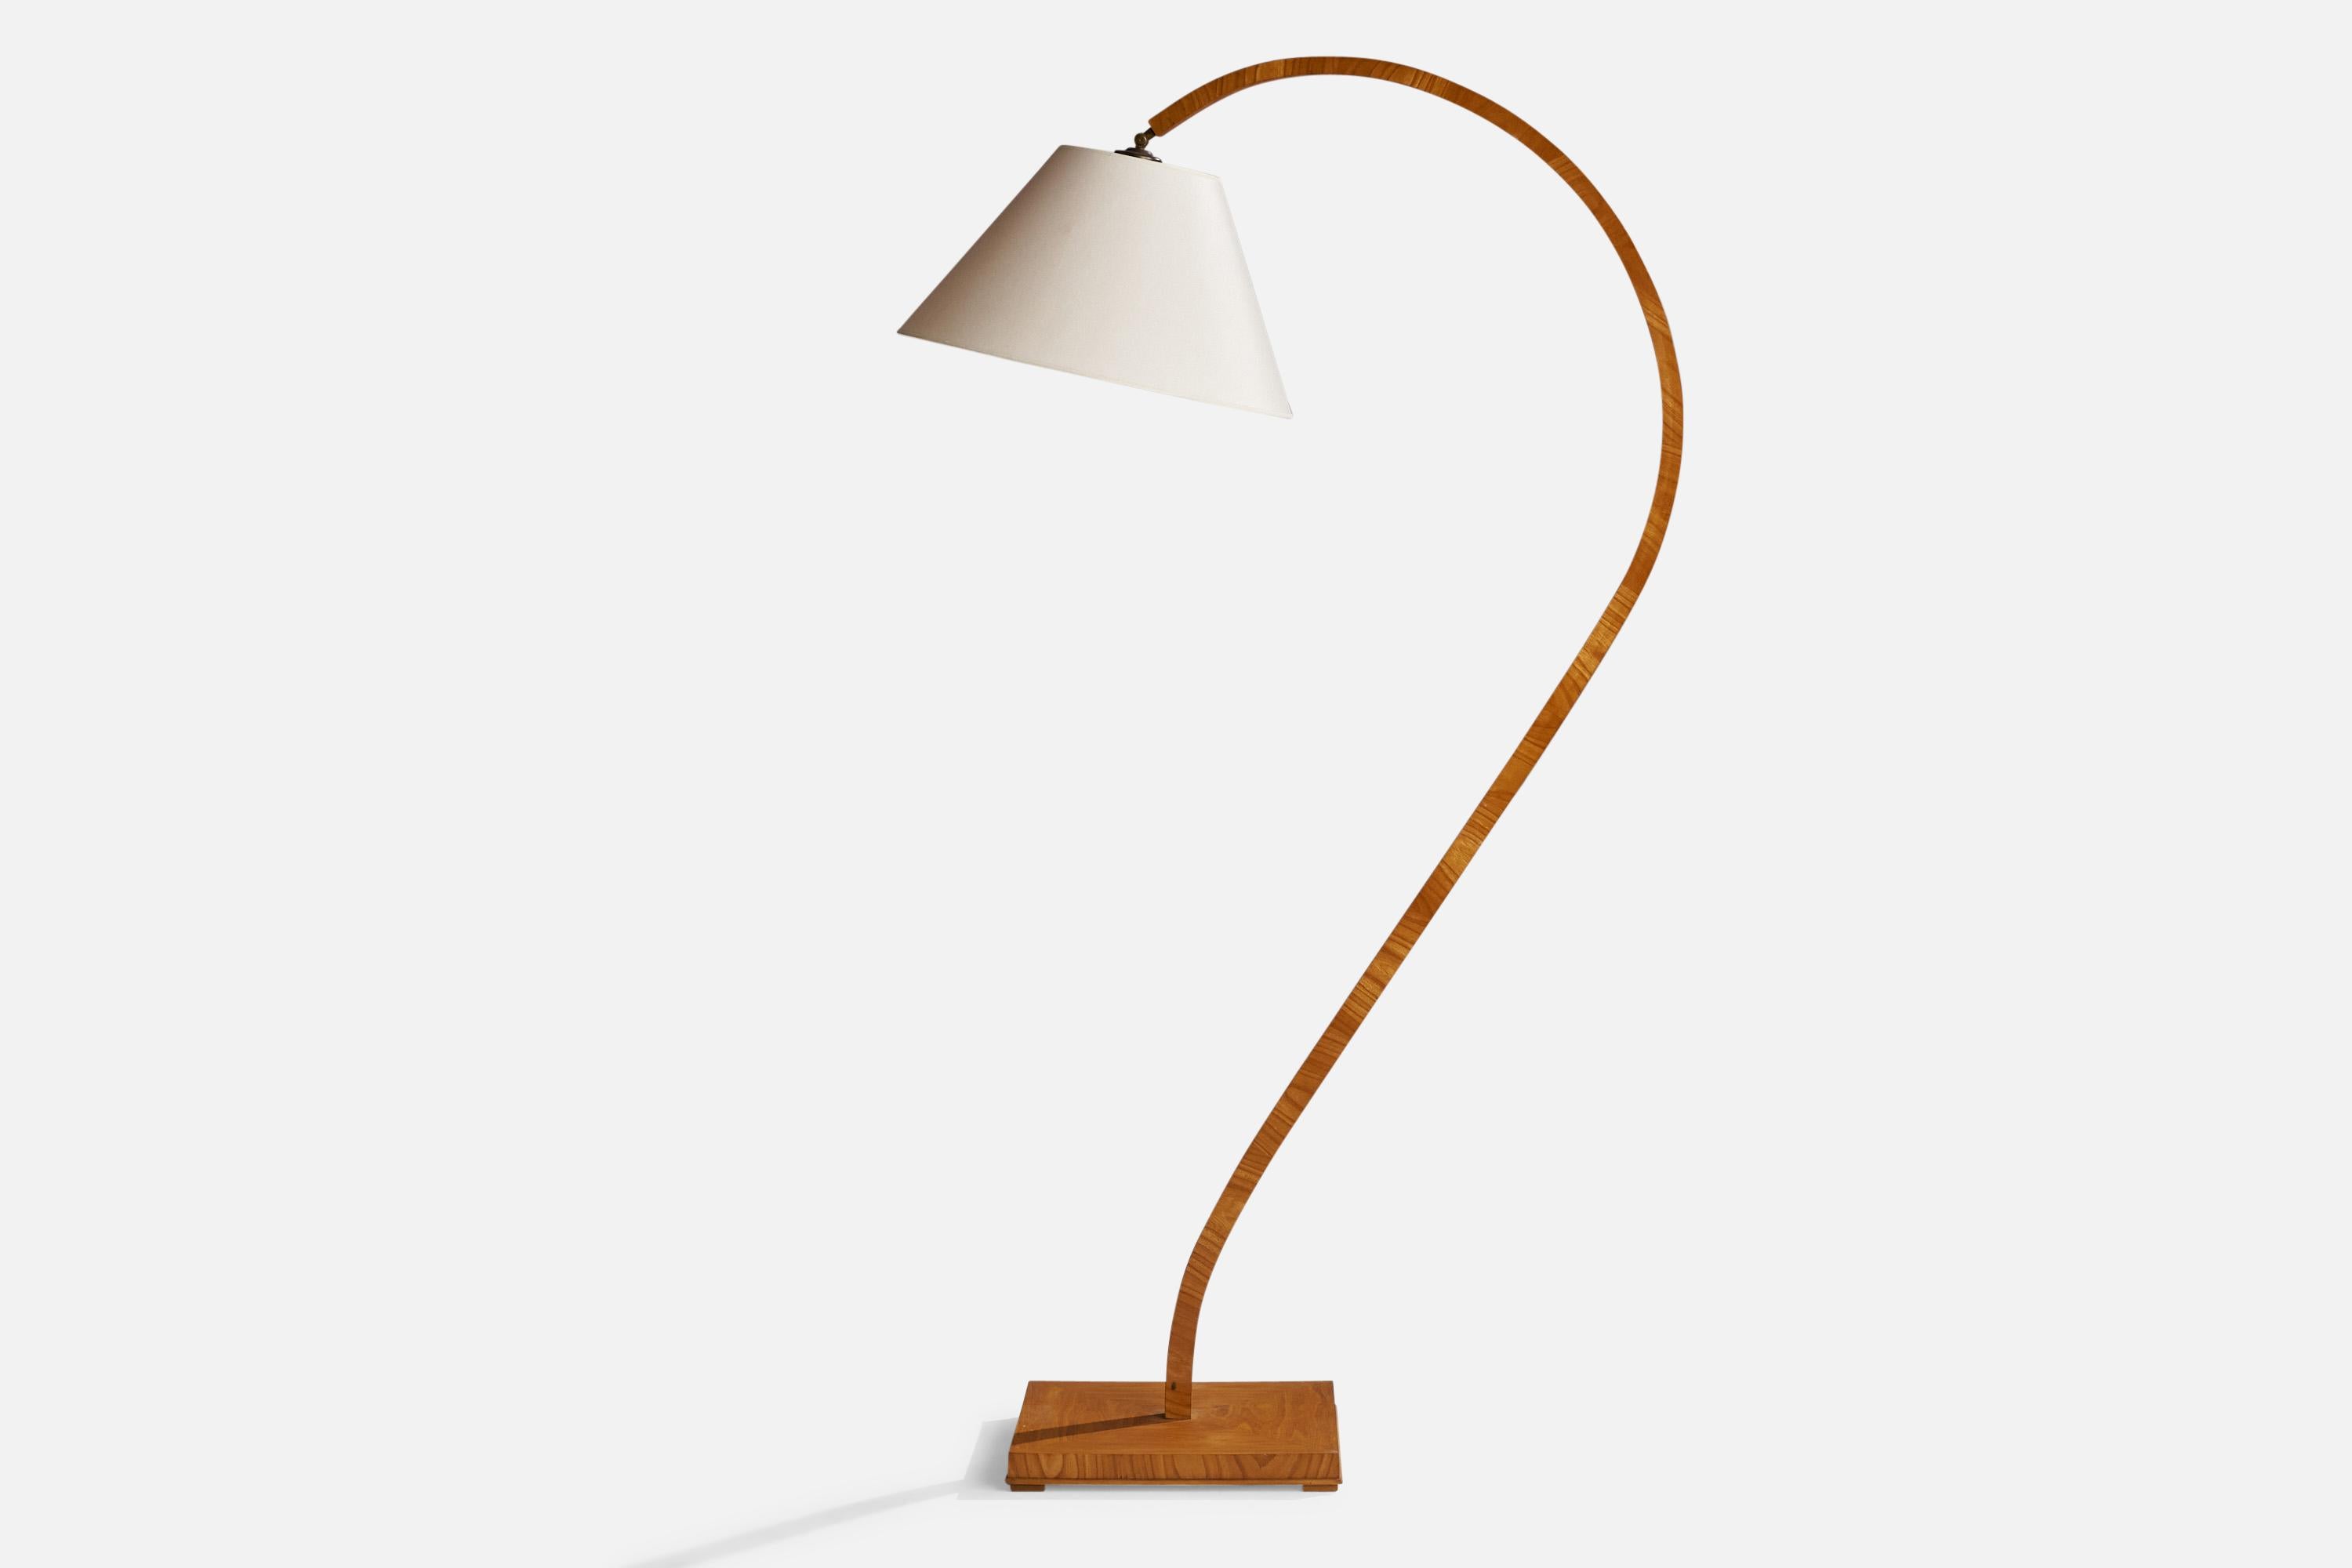 A brass, elm and off-white fabric floor lamp designed and produced in Sweden, 1940s.

Overall Dimensions (inches): 67.5” H x 19.5”  W x 39”  D
Stated dimensions include shade.
Bulb Specifications: E-26 Bulb
Number of Sockets: 1
All lighting will be